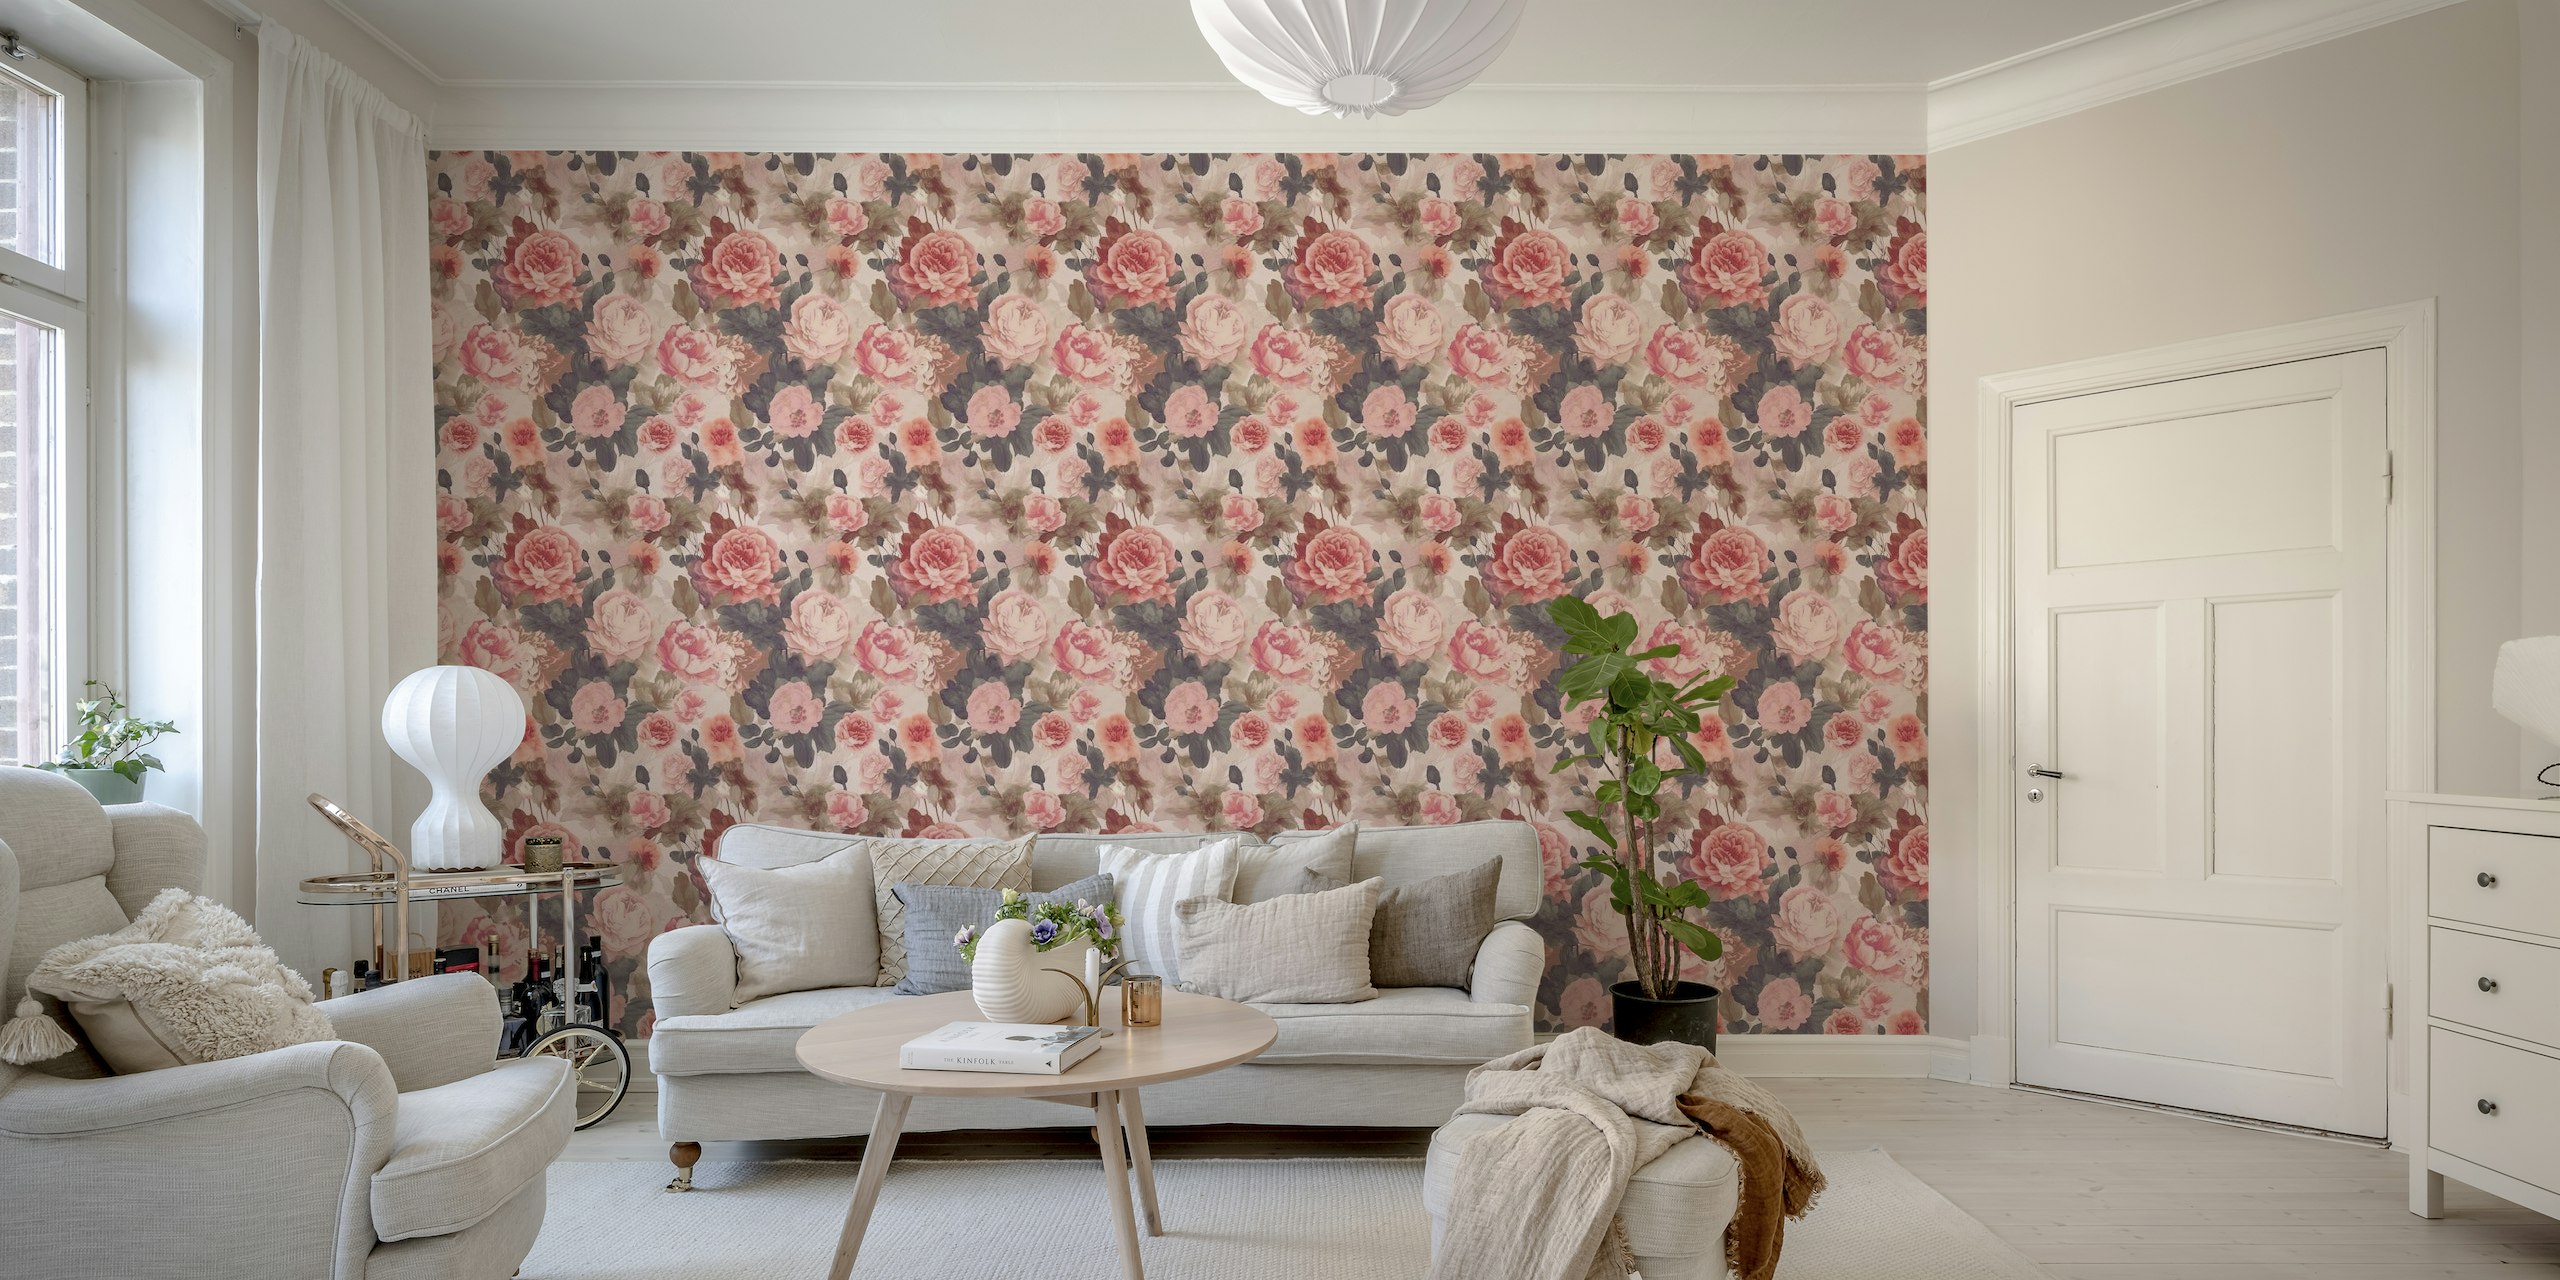 Baroque Roses Floral Nostalgia Design In Moody Pink Colors tapety